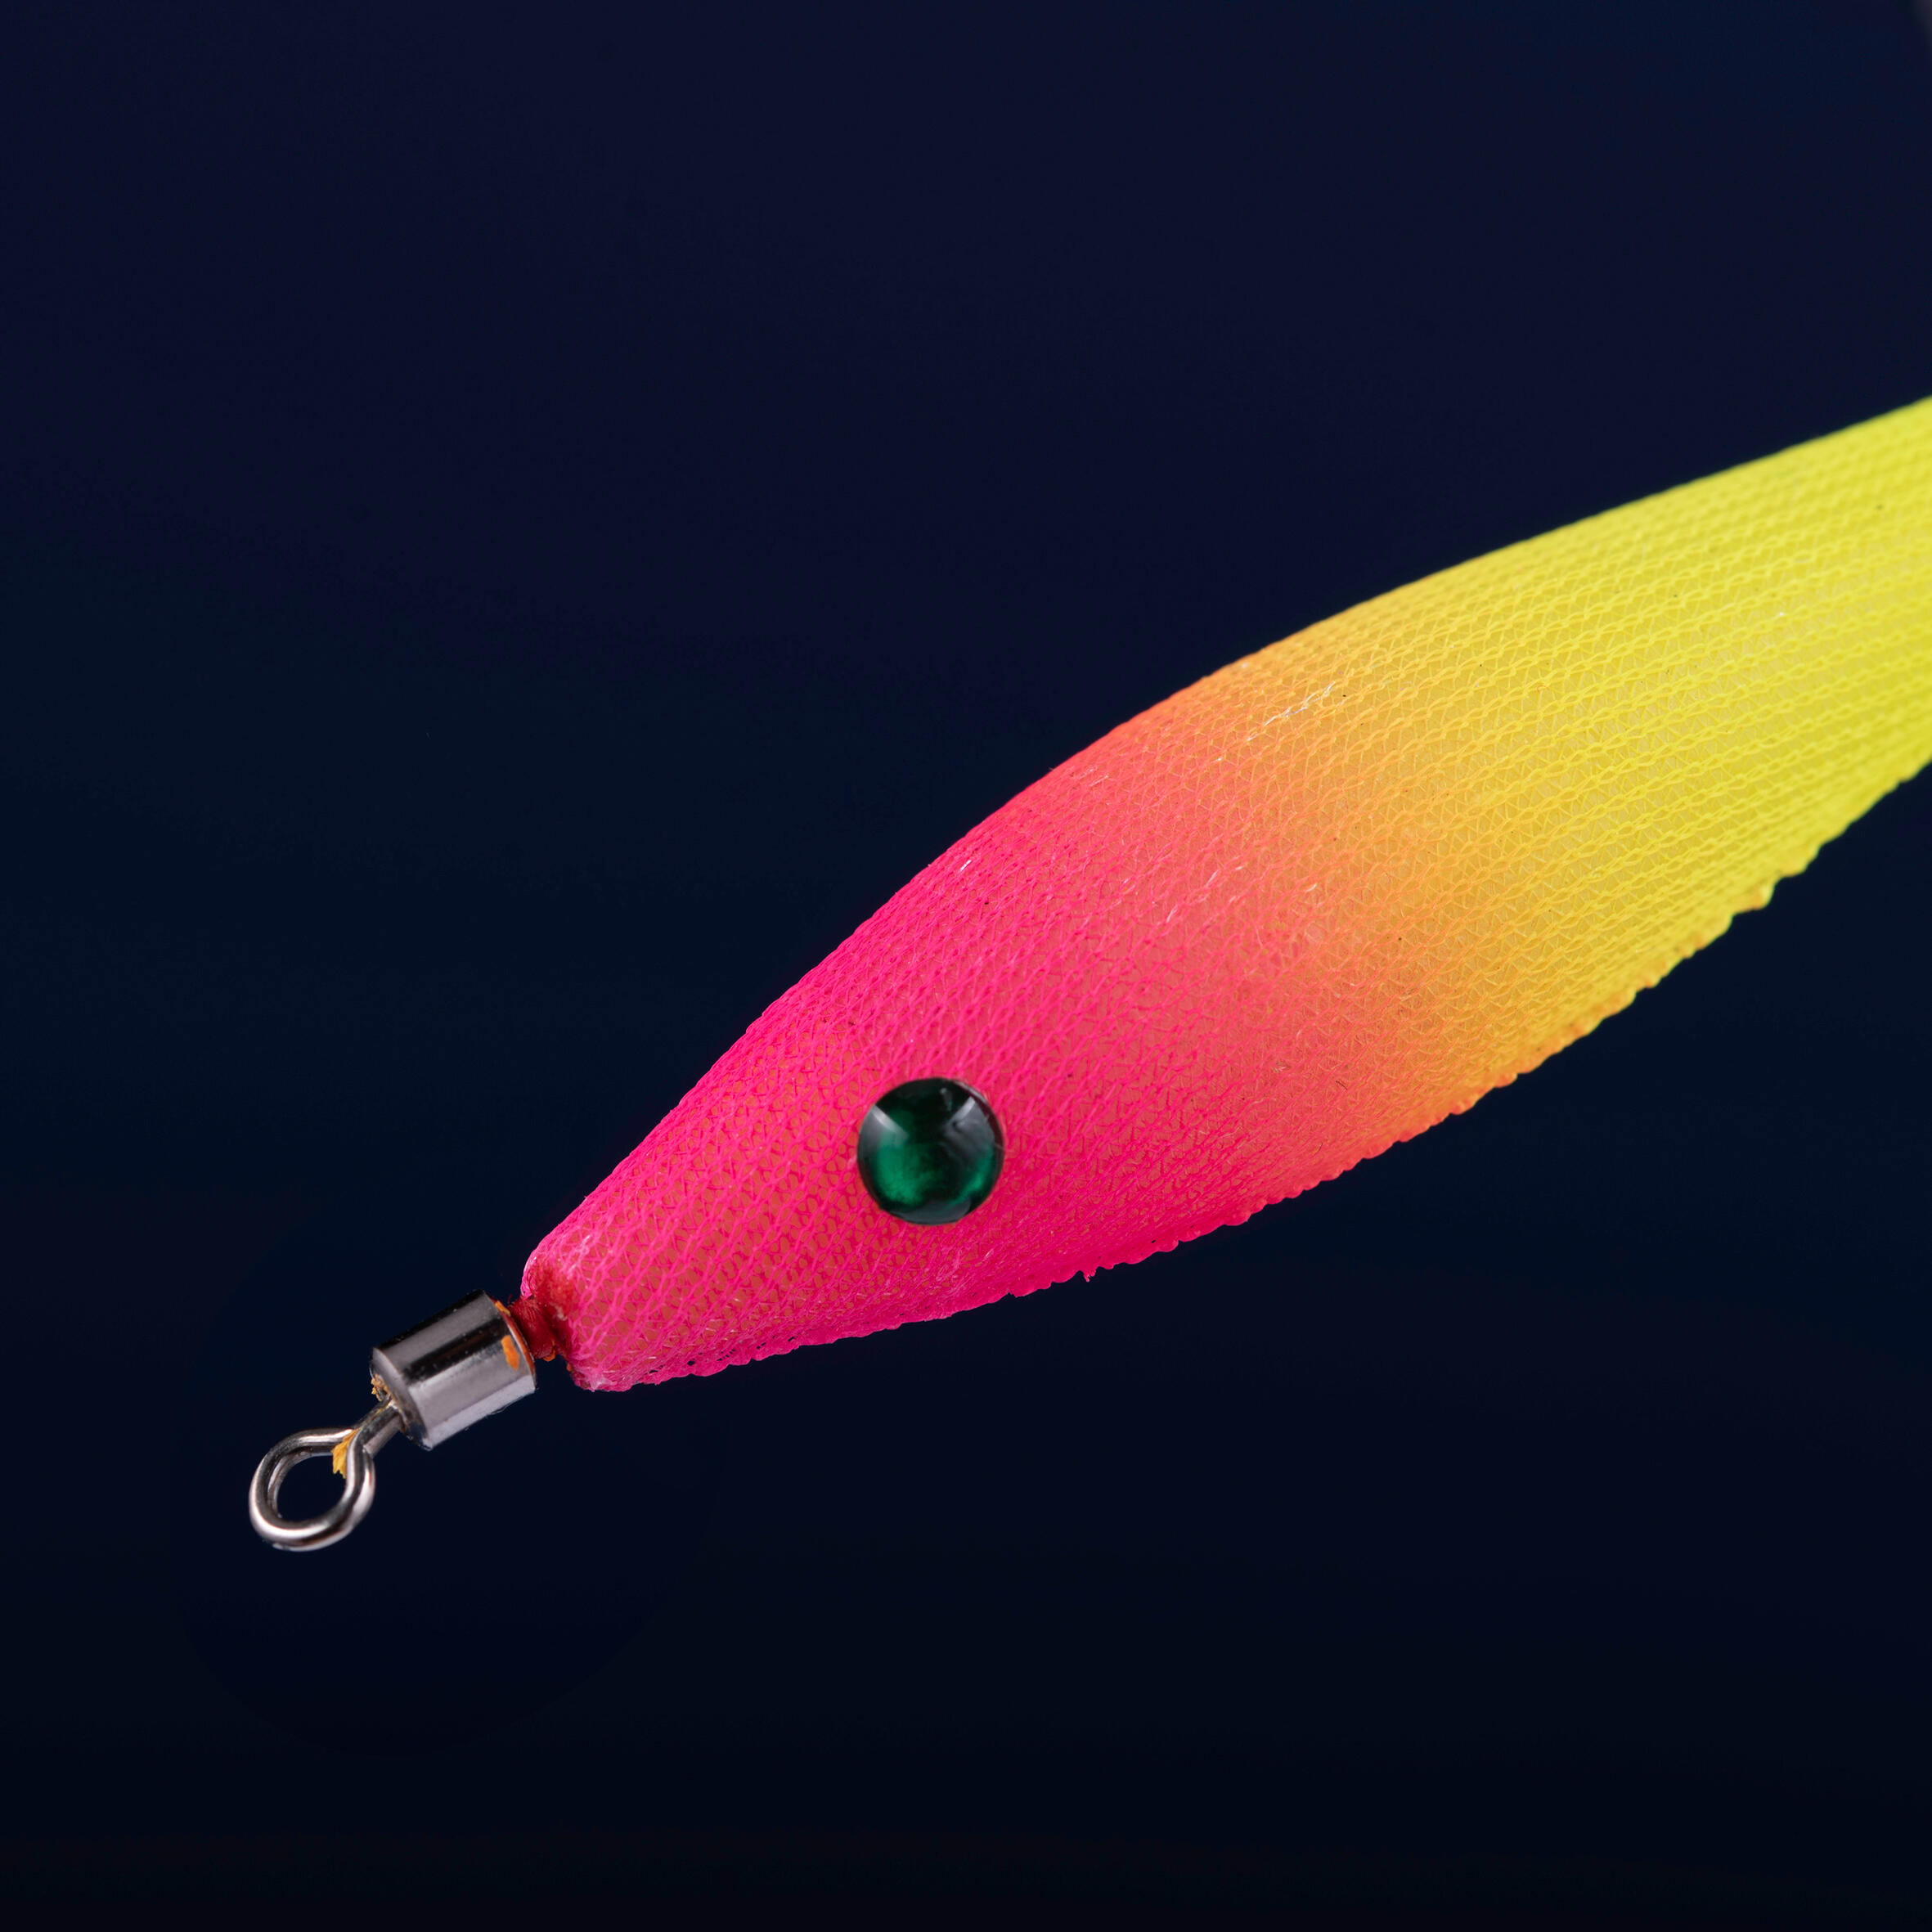 Oppai EBIKA SFT 2.0/60 Jig for Cuttlefish and Squid fishing - Neon Pink 3/5